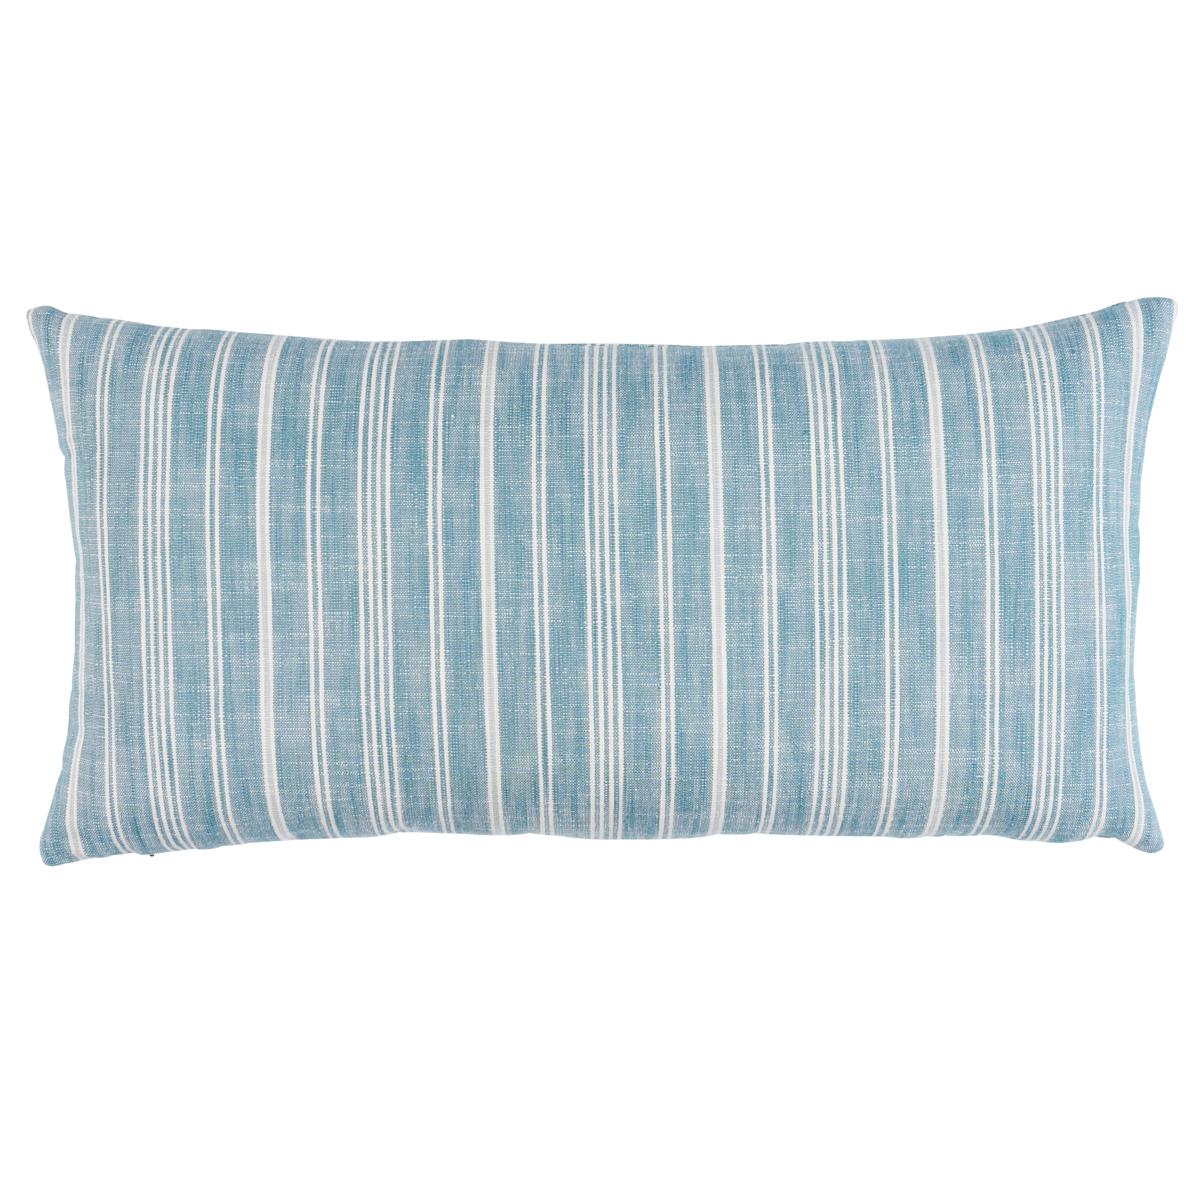 Lucy Stripe Pillow in Indigo 24 x 12" For Sale